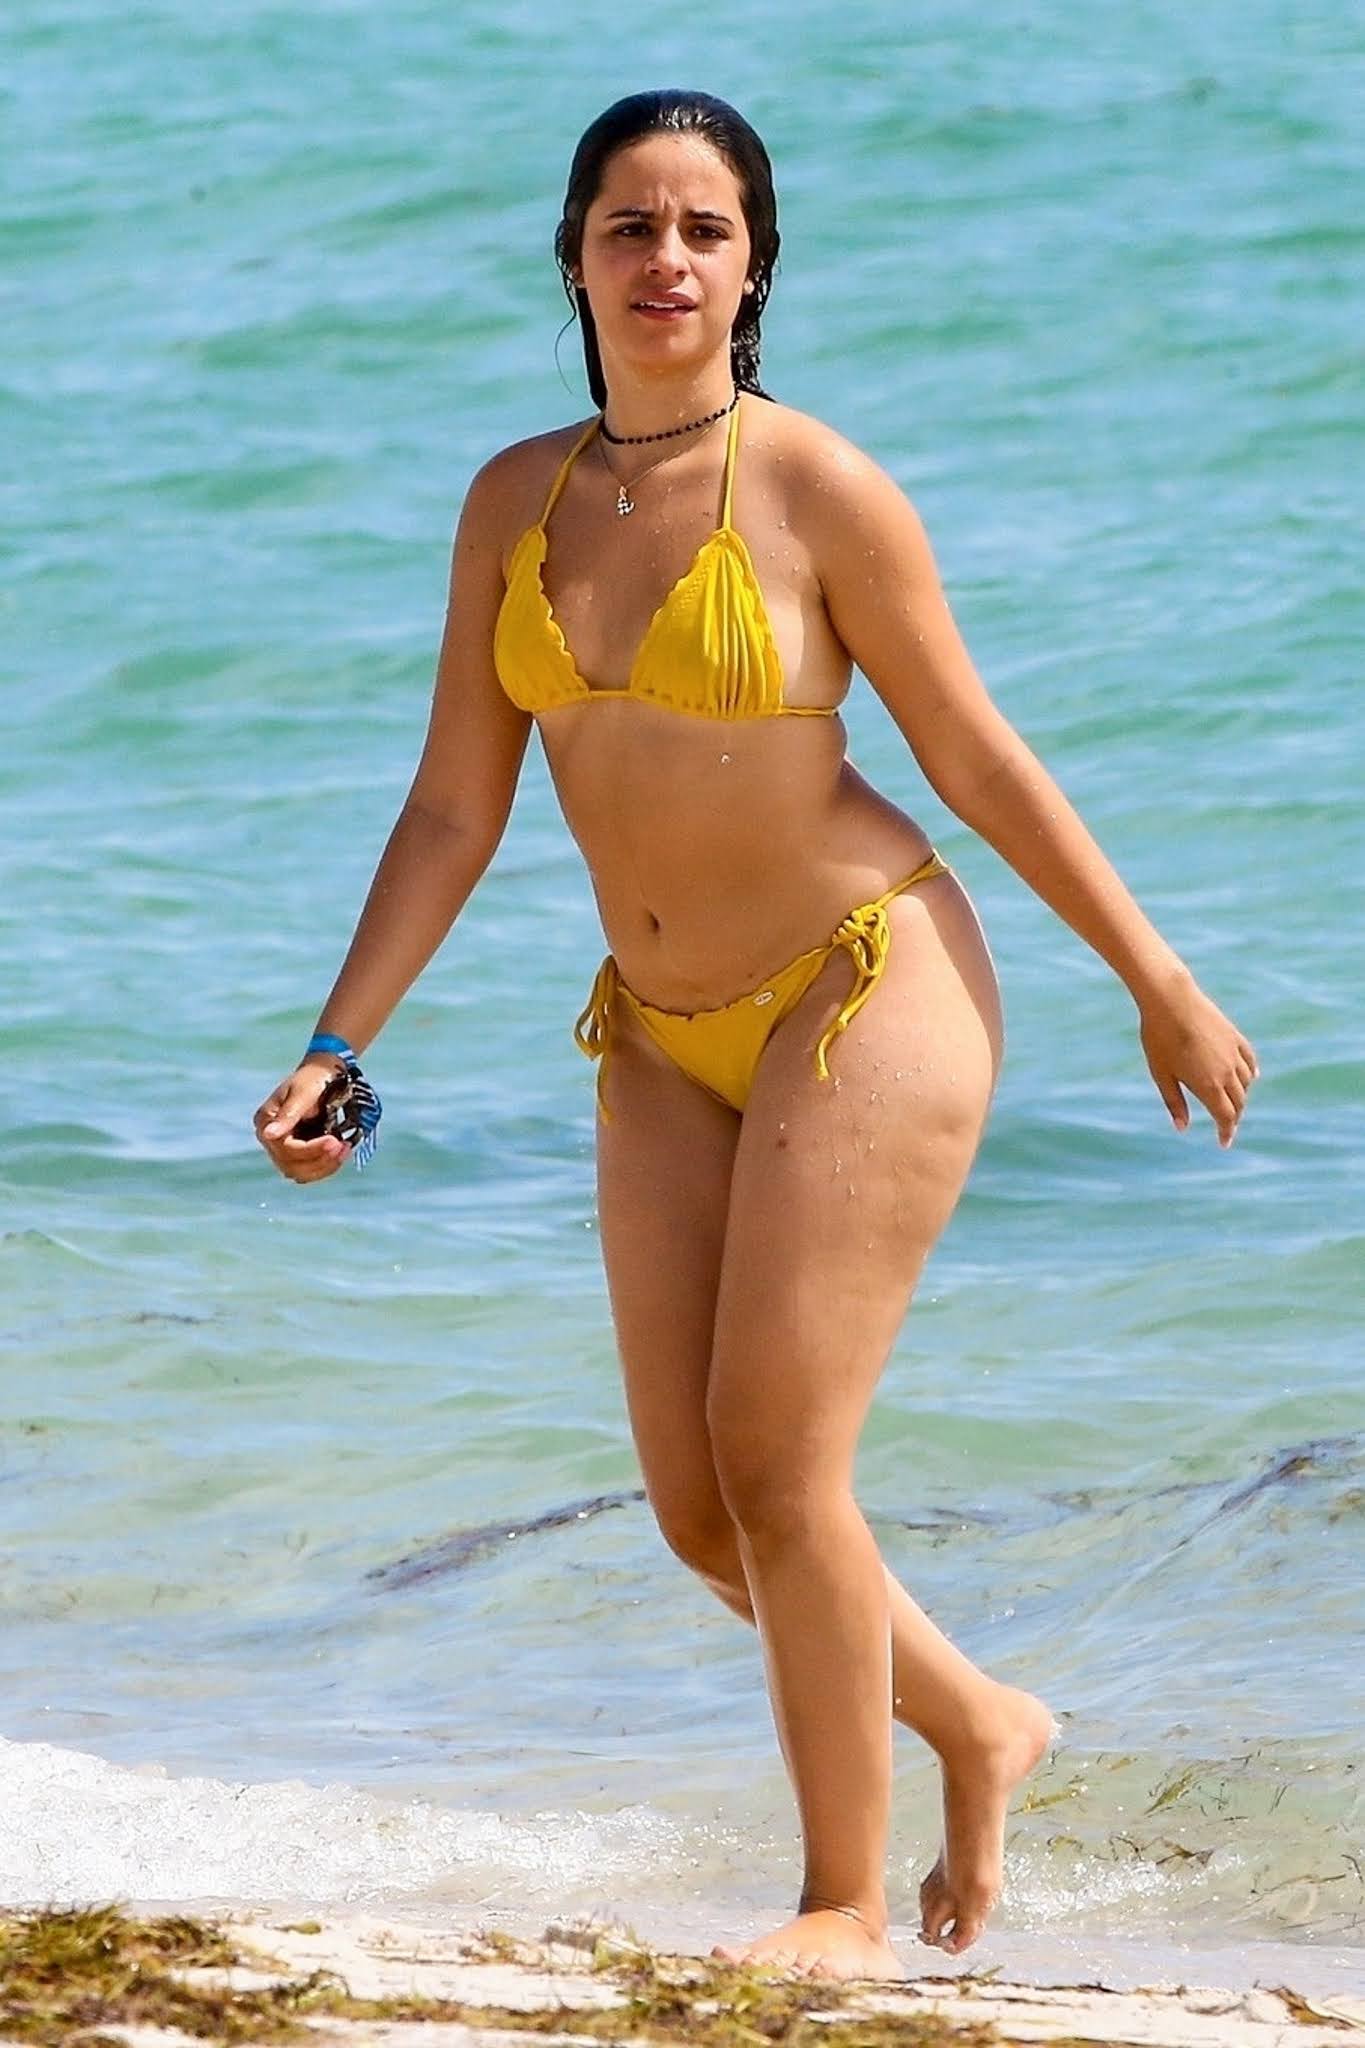 Camila Cabello shows off her sexy curves in a yellow thong bikini on the beach in Miami